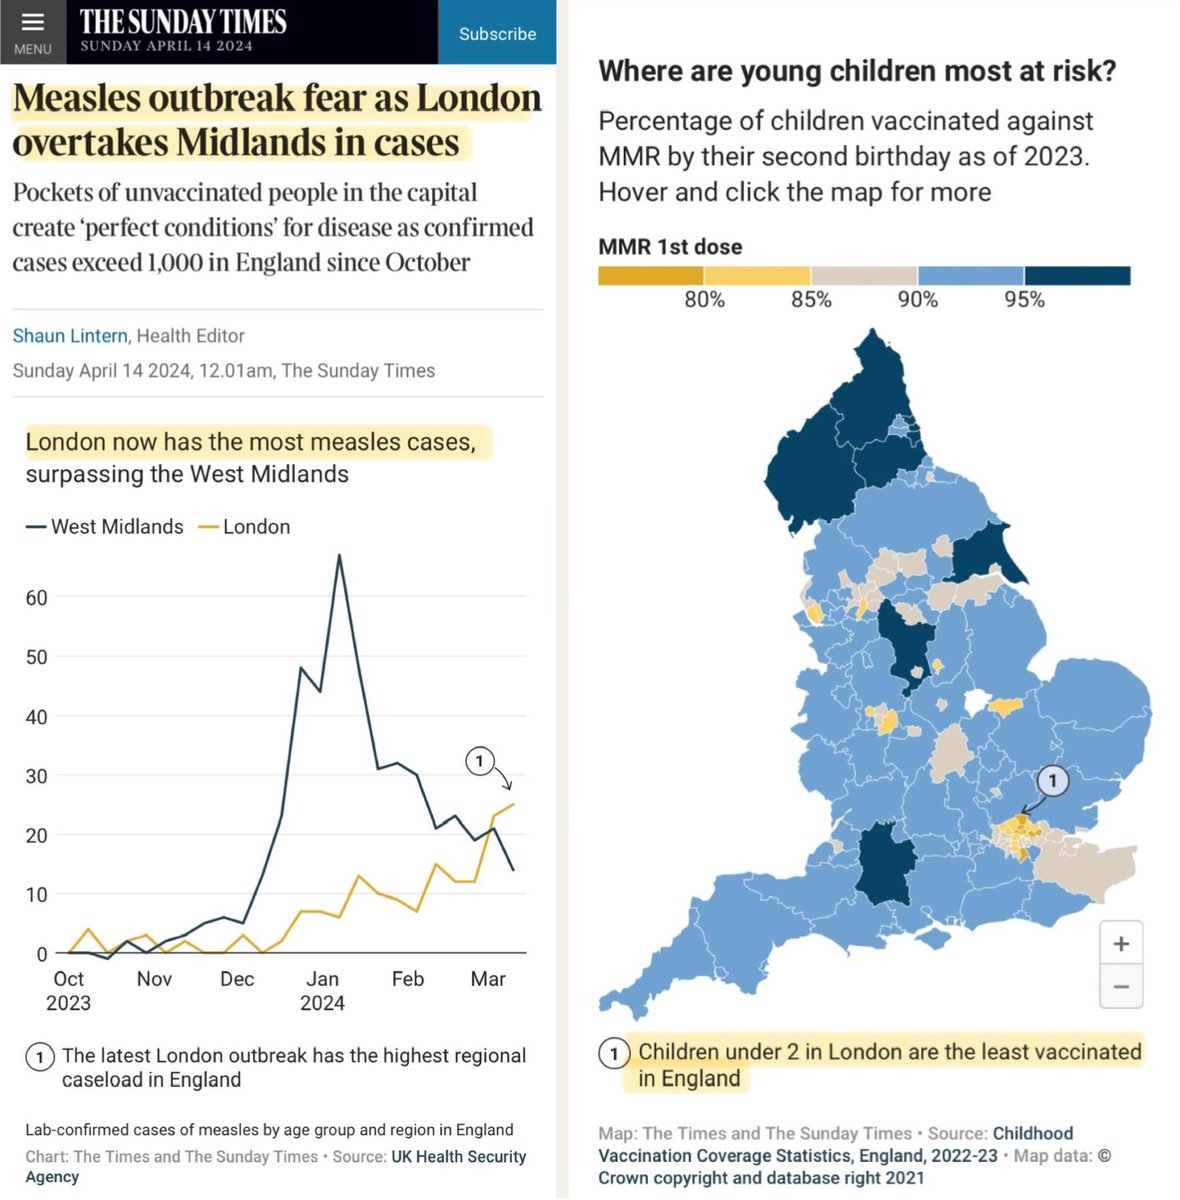 Measles cases are rising fast in London. This is worrying because London’s children are the LEAST vaccinated against measles. In parts of London, the % of children who’ve had both doses of MMR is as low as 56% (the target is 95%). I fear a major outbreak may now be inevitable.